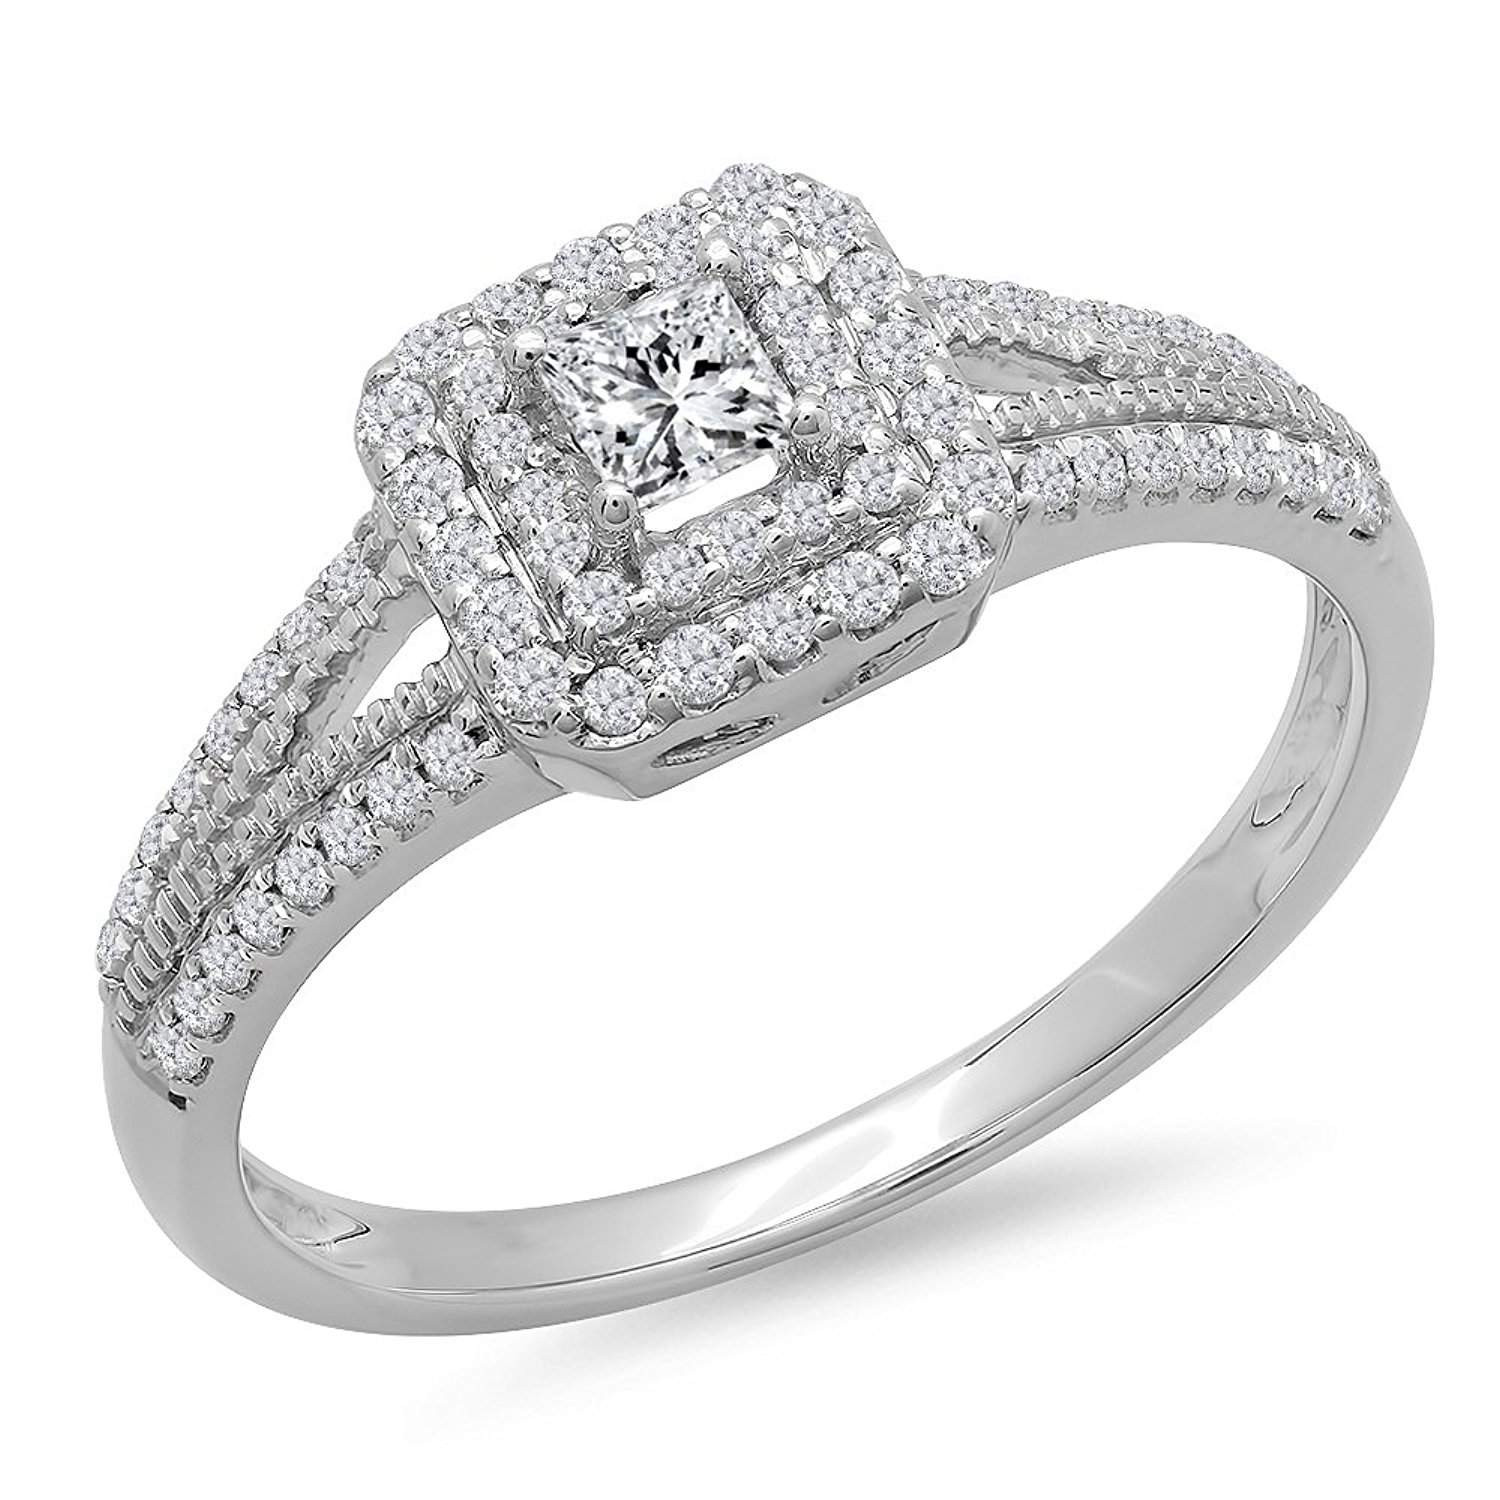 Diamond Rings Cheap
 Top 10 Best Valentine’s Day Deals on Engagement Rings